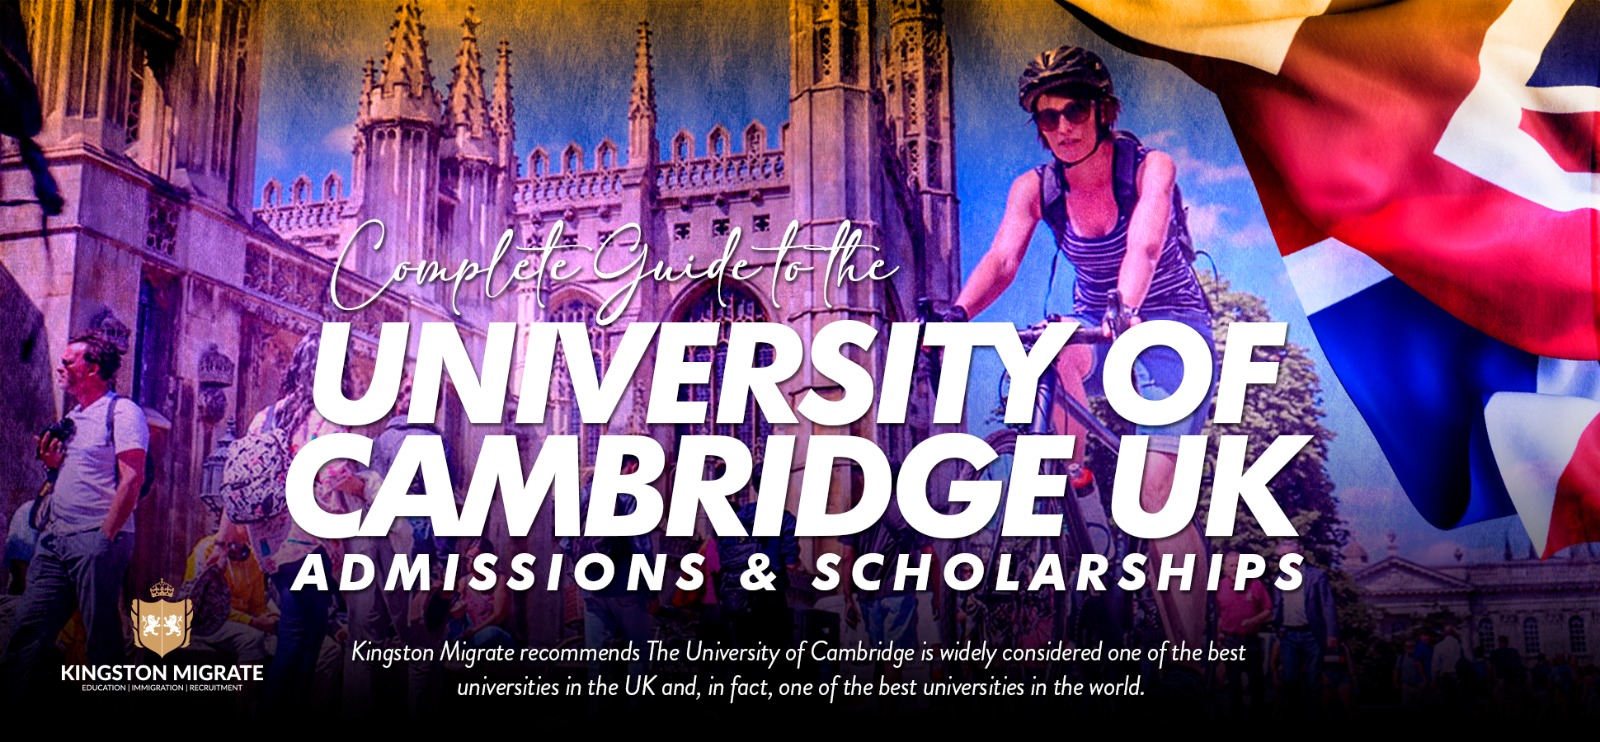 Kingston Migrate: Complete Guide to the University of Cambridge UK Admissions and Scholarships